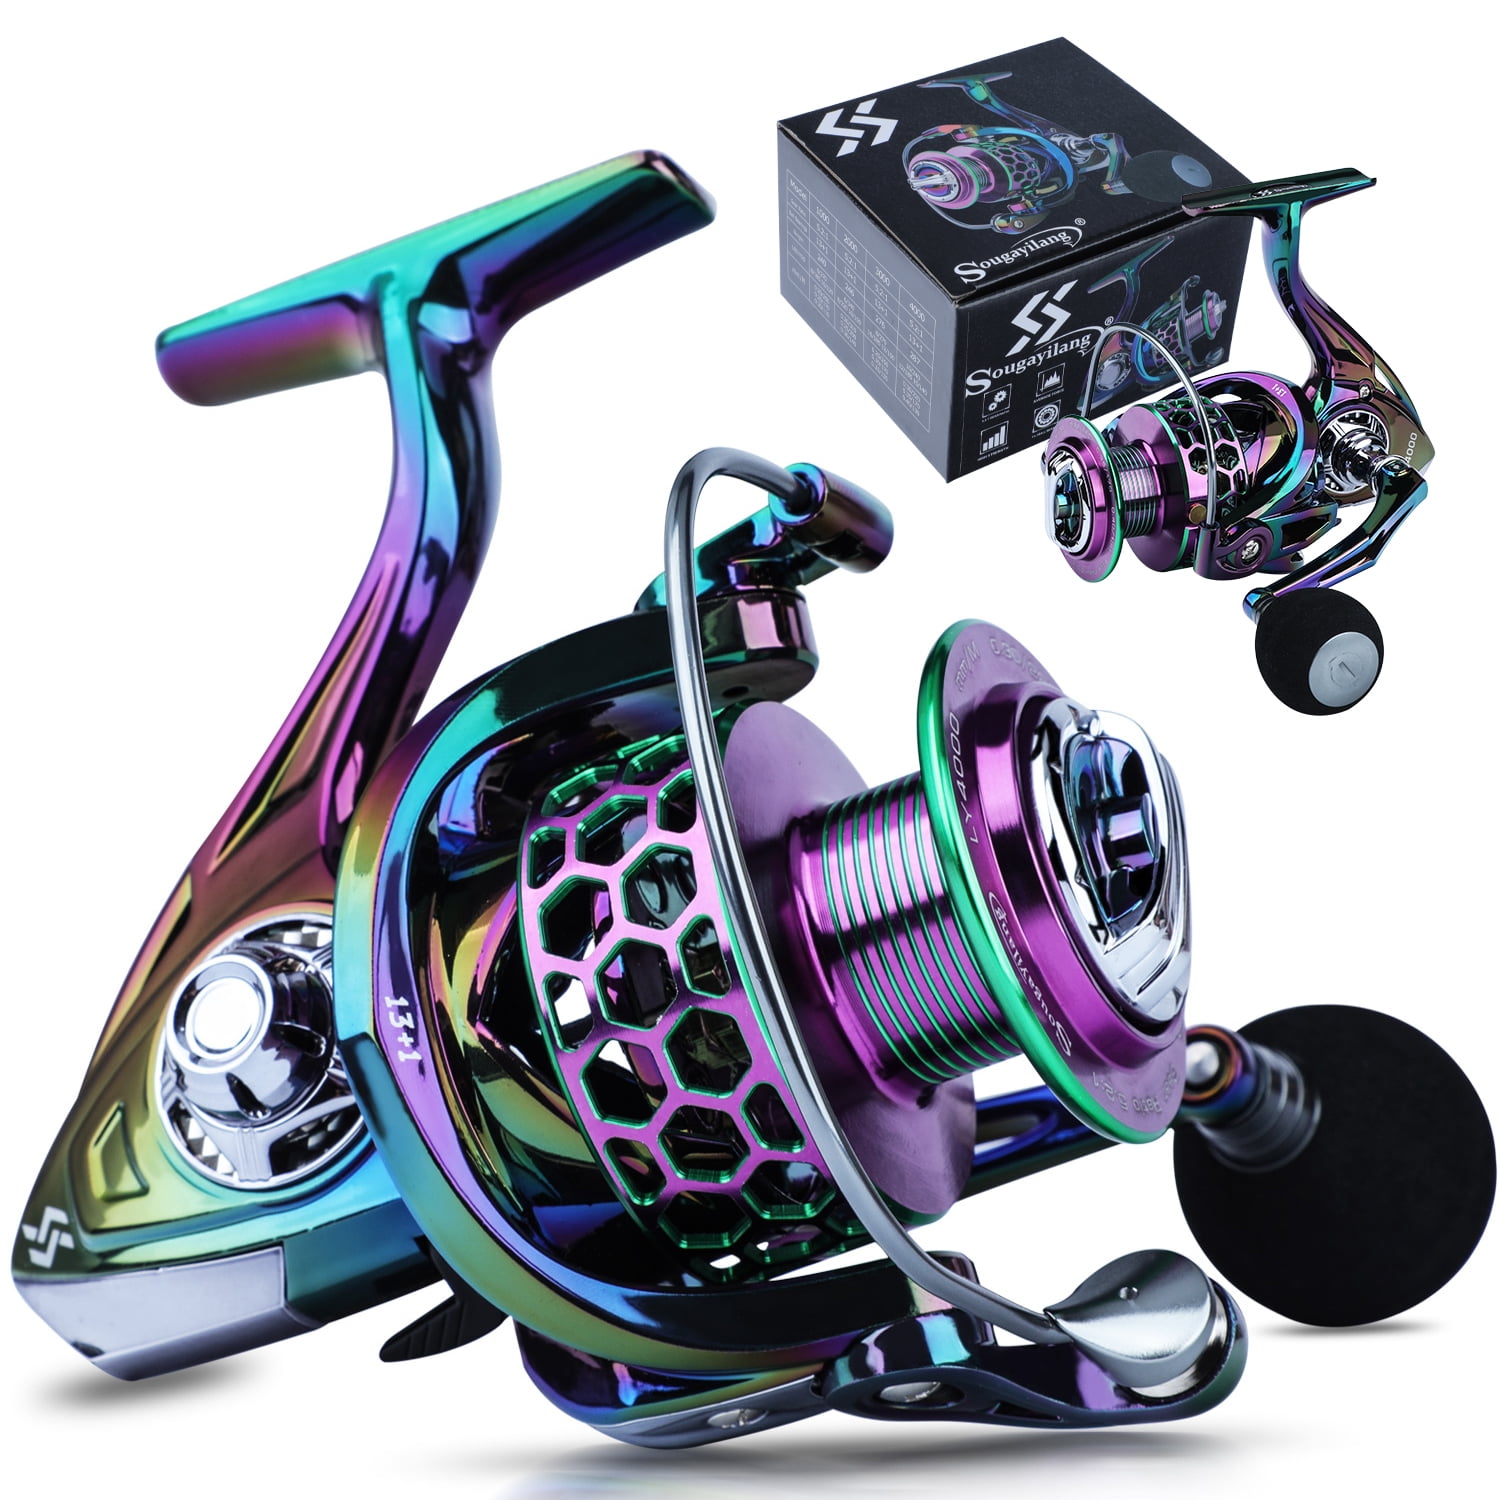 Sougayilang Colorful Fishing Reel 13 for Freshwater 1 BB Light Weight Ultra Smooth Powerful Spinning Reels with CNC Line Management Graphite Frame